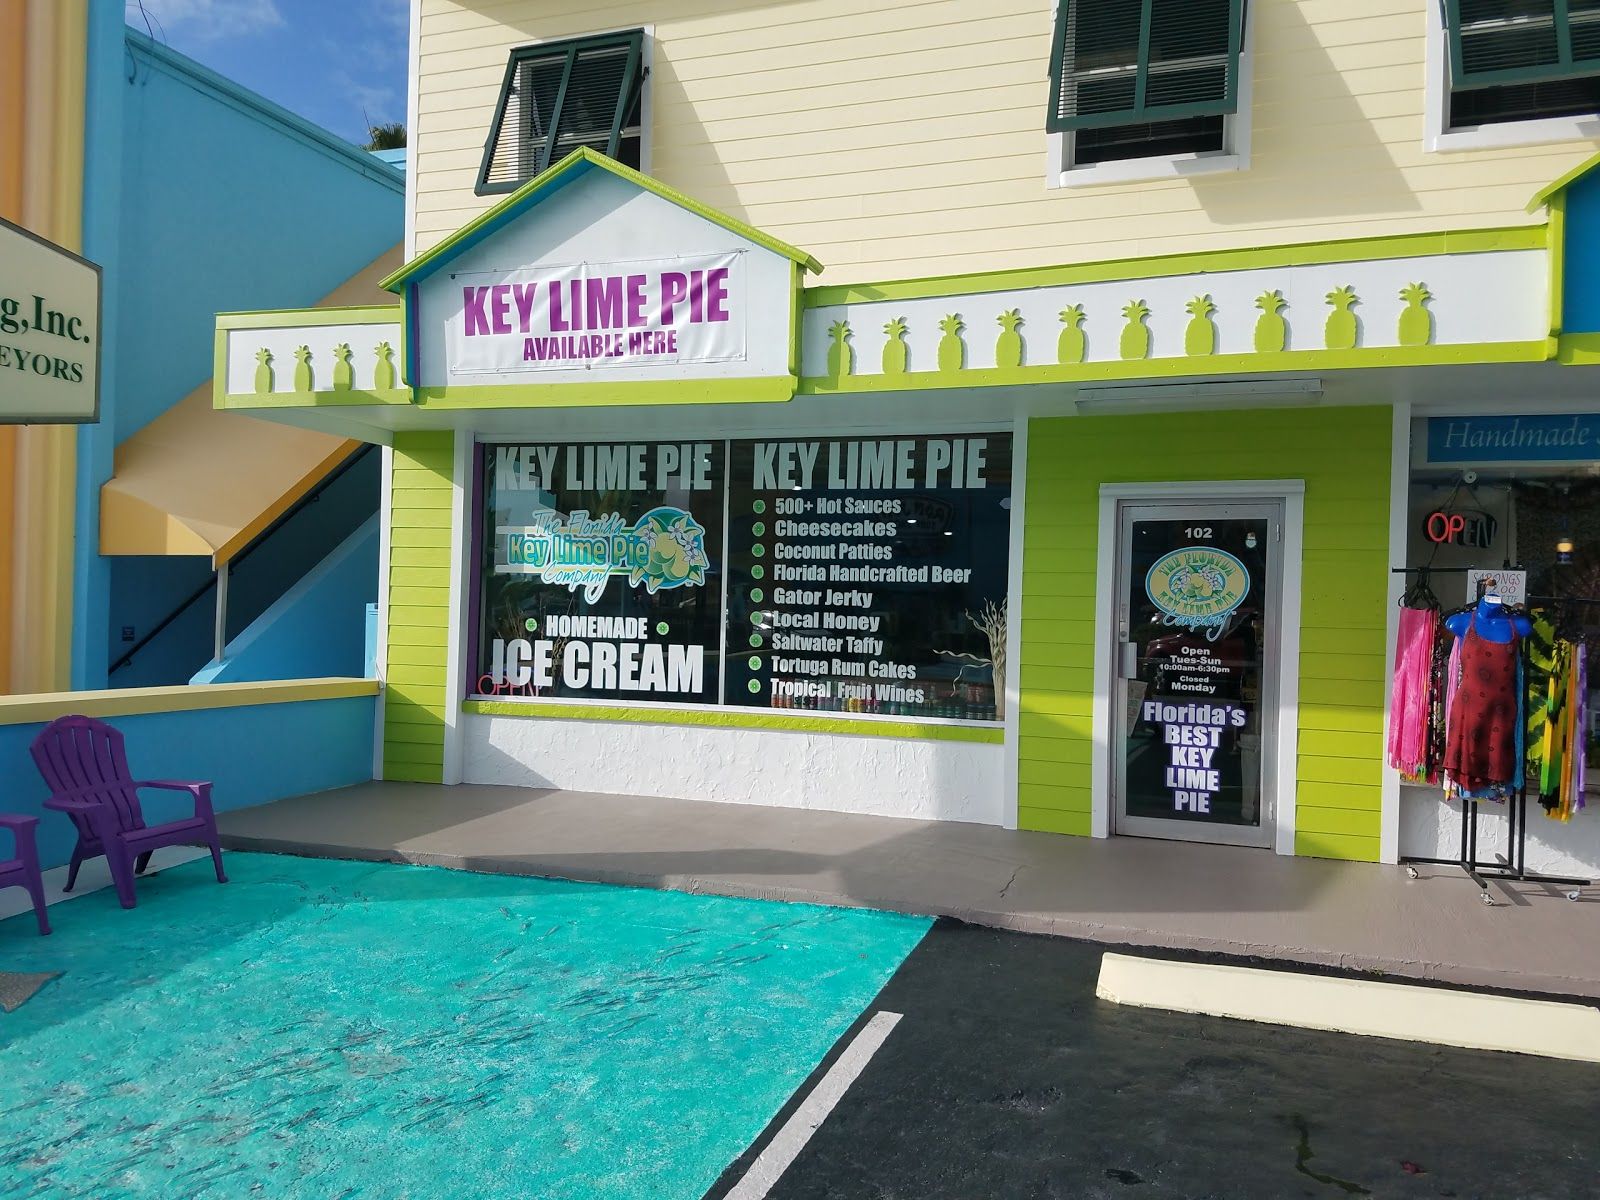 Visit The Florida Key Lime Pie Company on your trip to Cocoa Beach ...